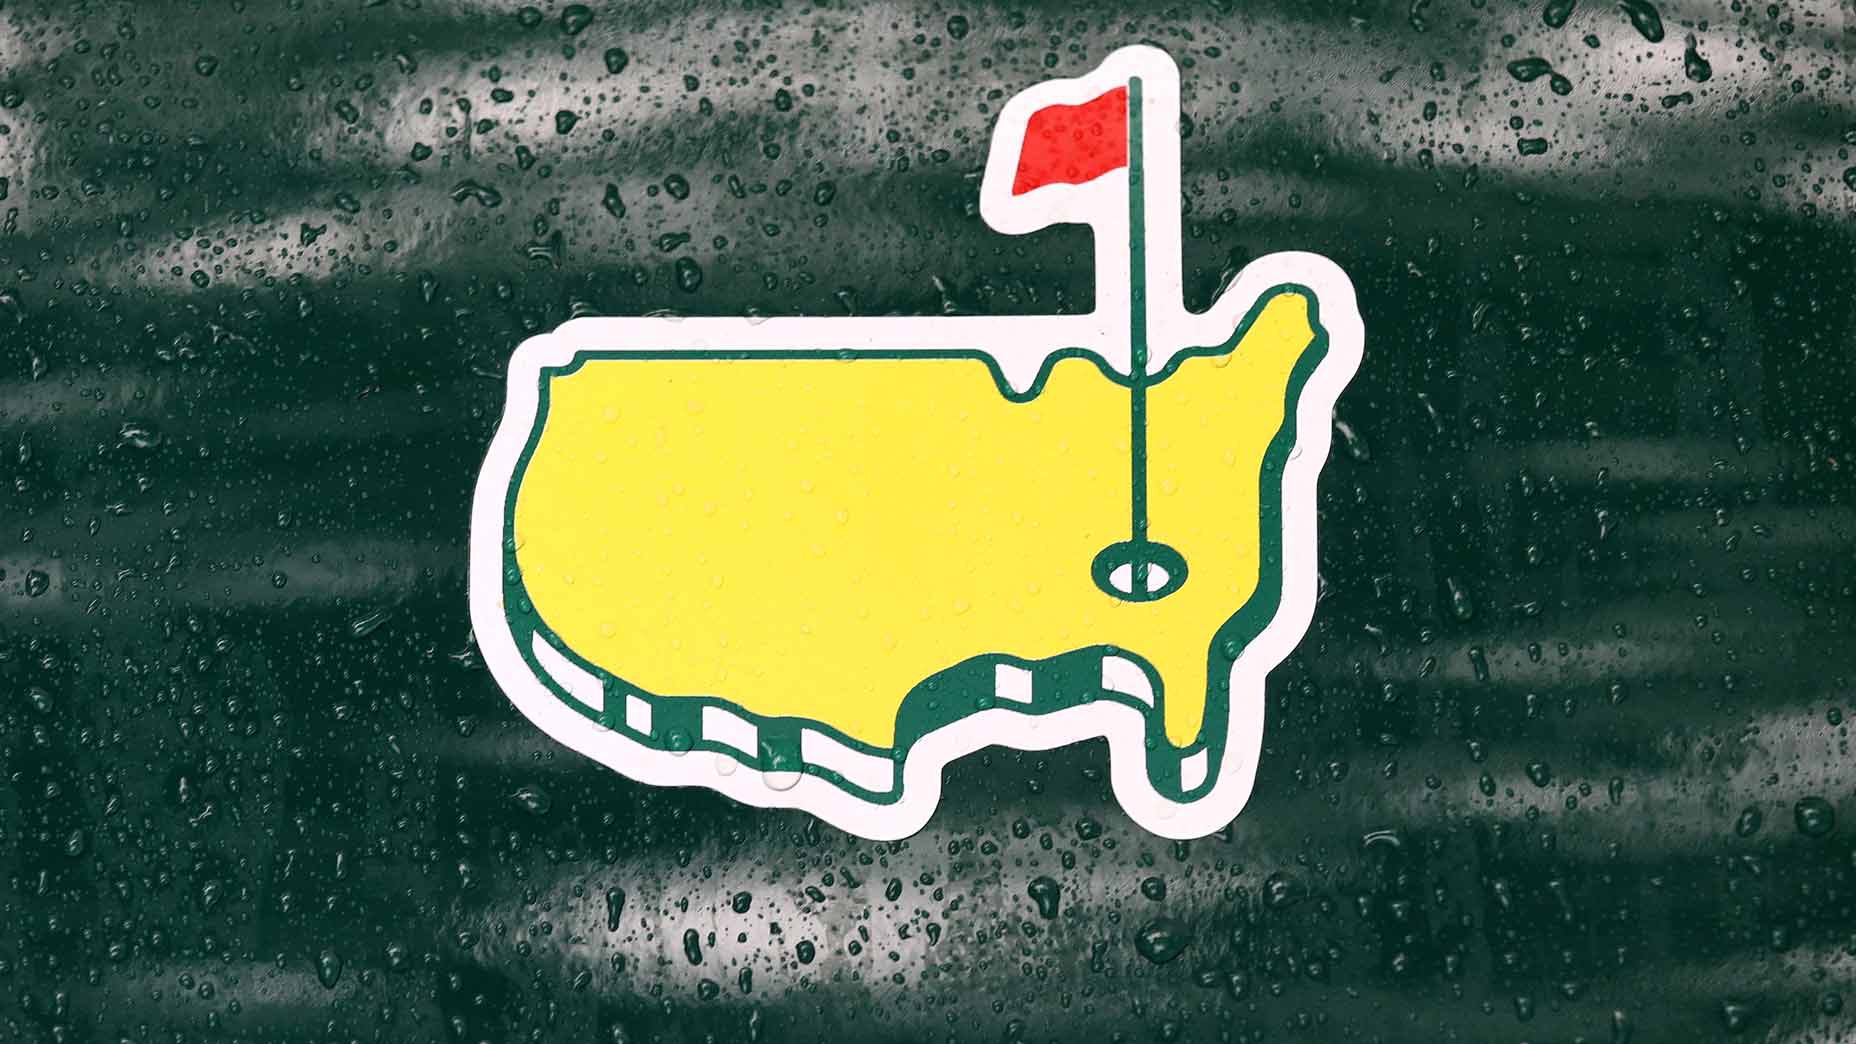 2023 Masters pairings and tee times